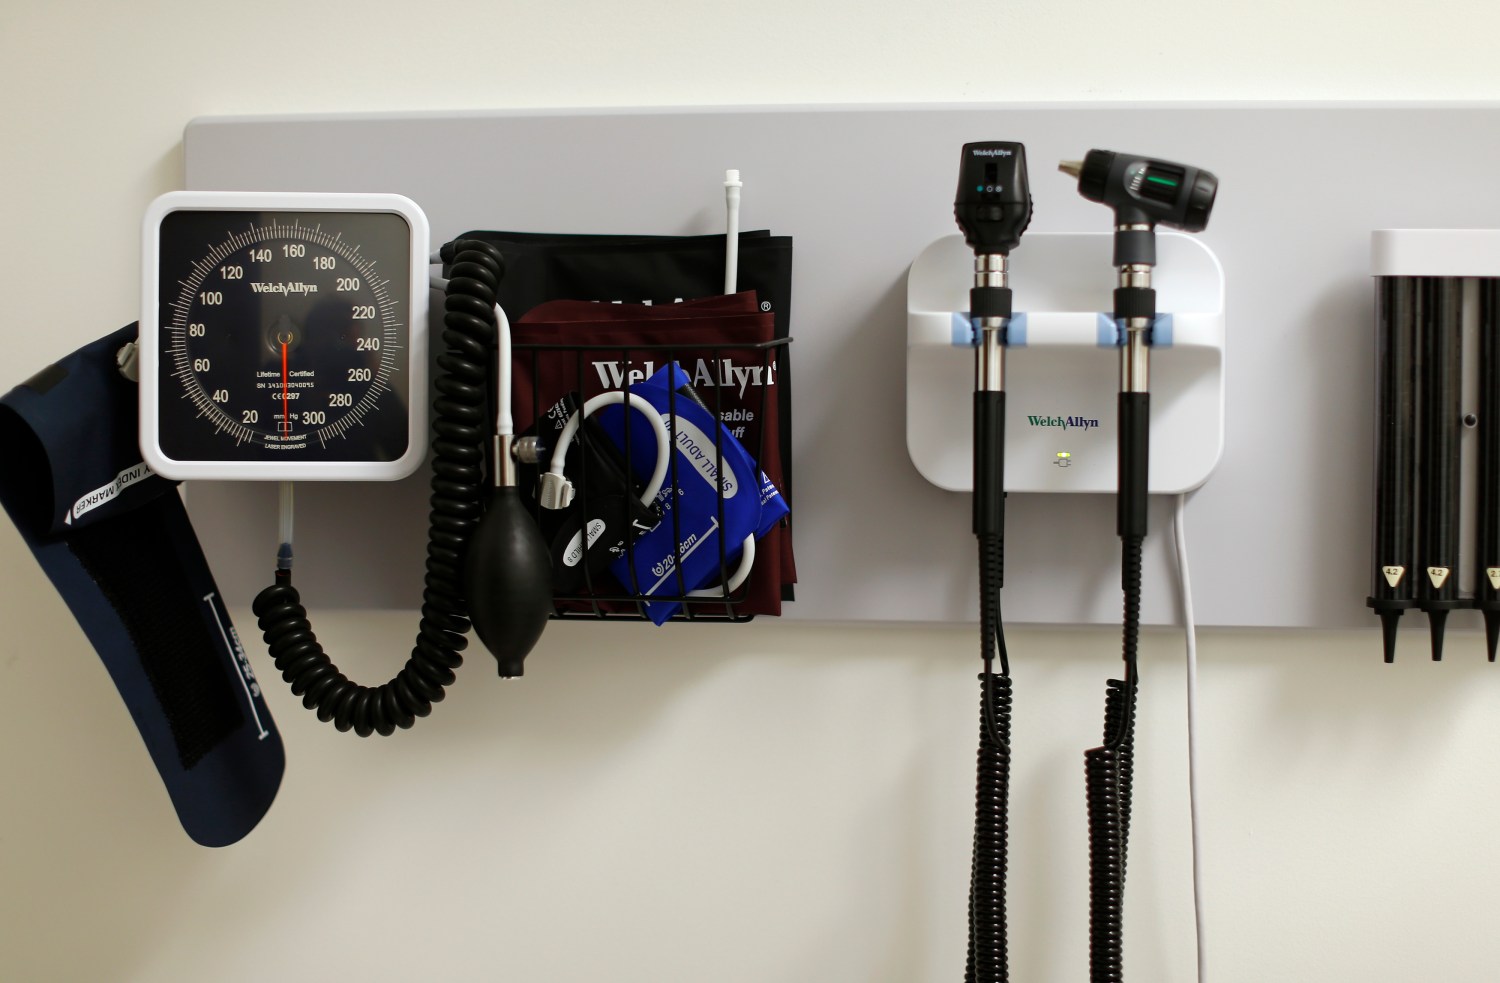 Medical equipment is pictured on the wall of an examination room inside a Kaiser Permanente health clinic located inside a Target retail department store in San Diego